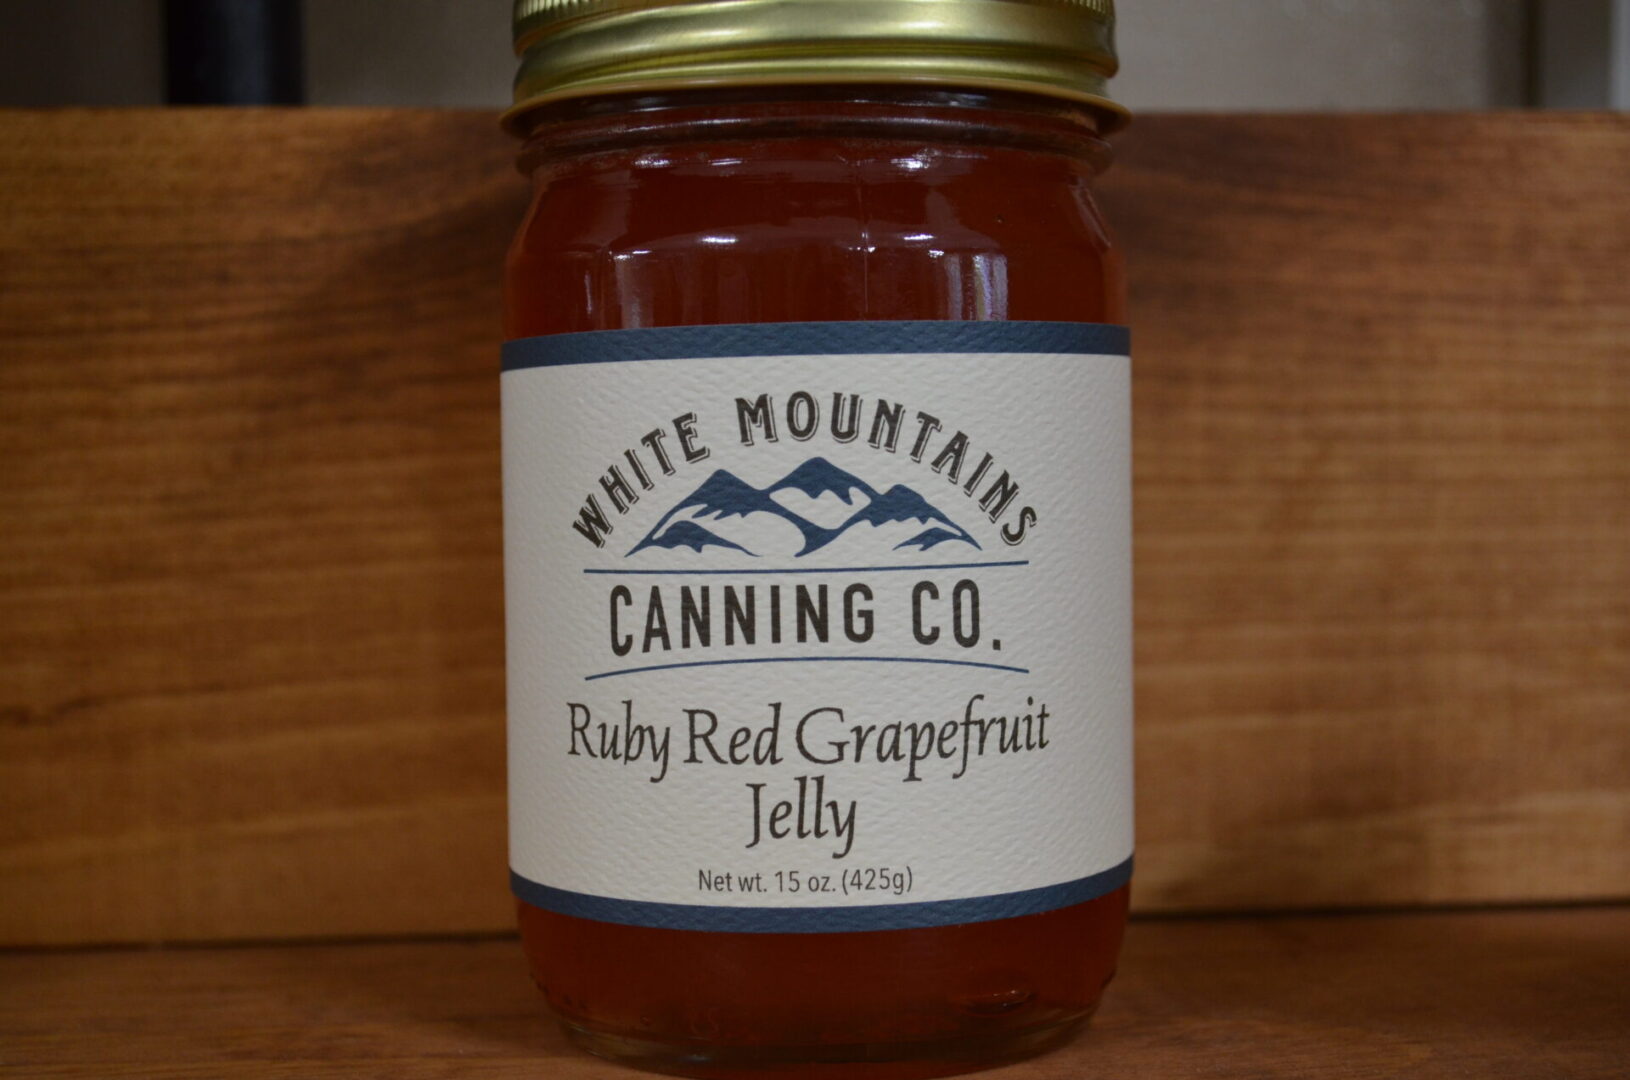 A jar of jelly sitting on top of a wooden table.